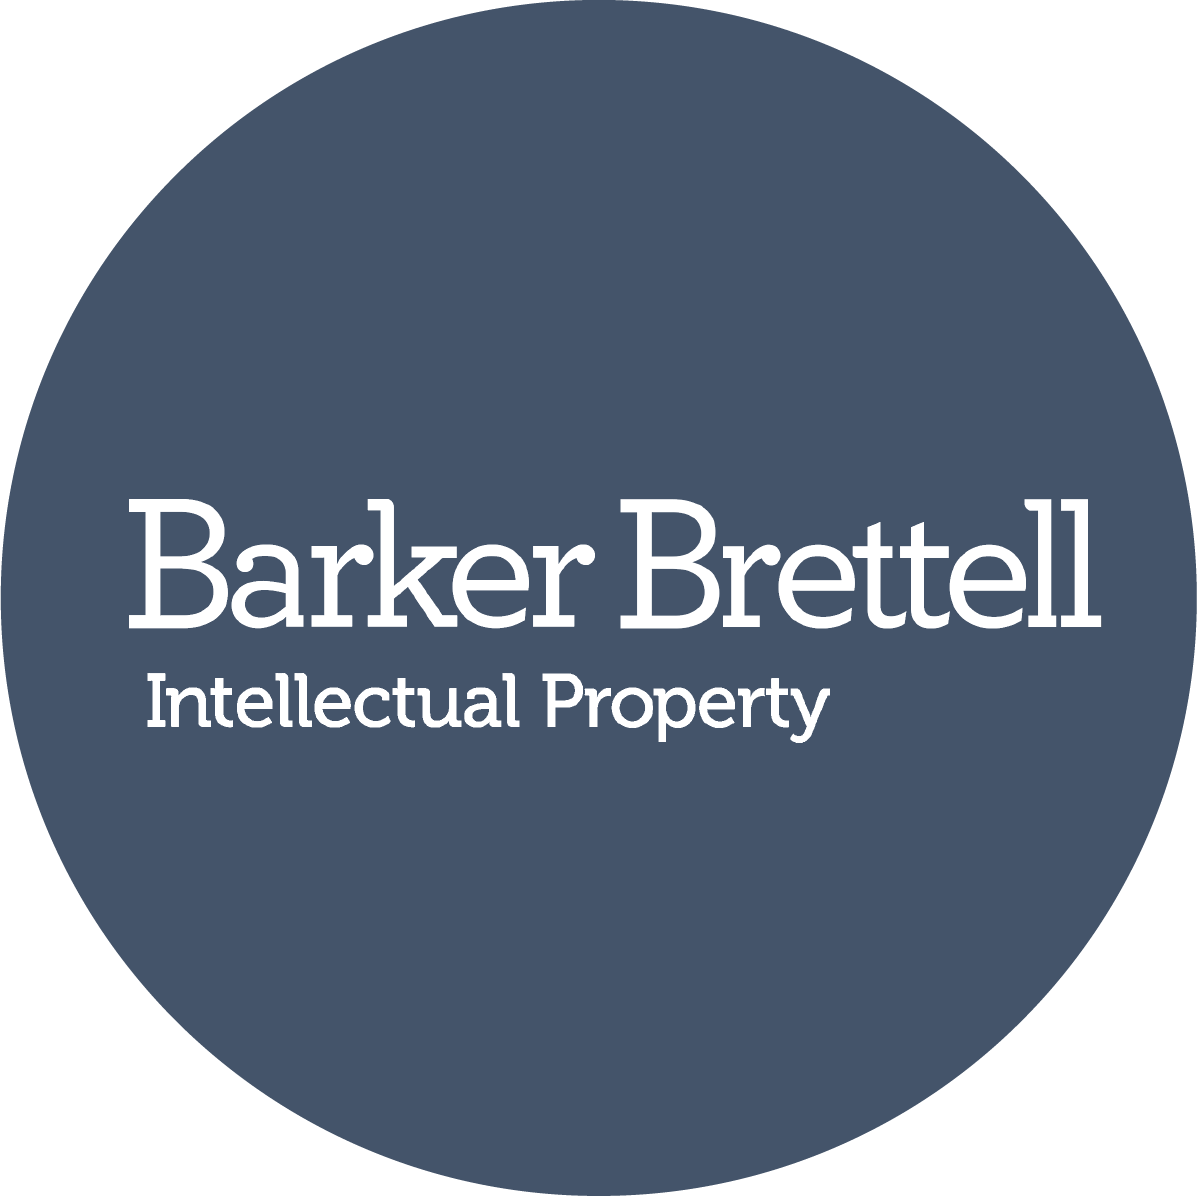 Barker Brettell Intellectual Property logo in white and in blue circle